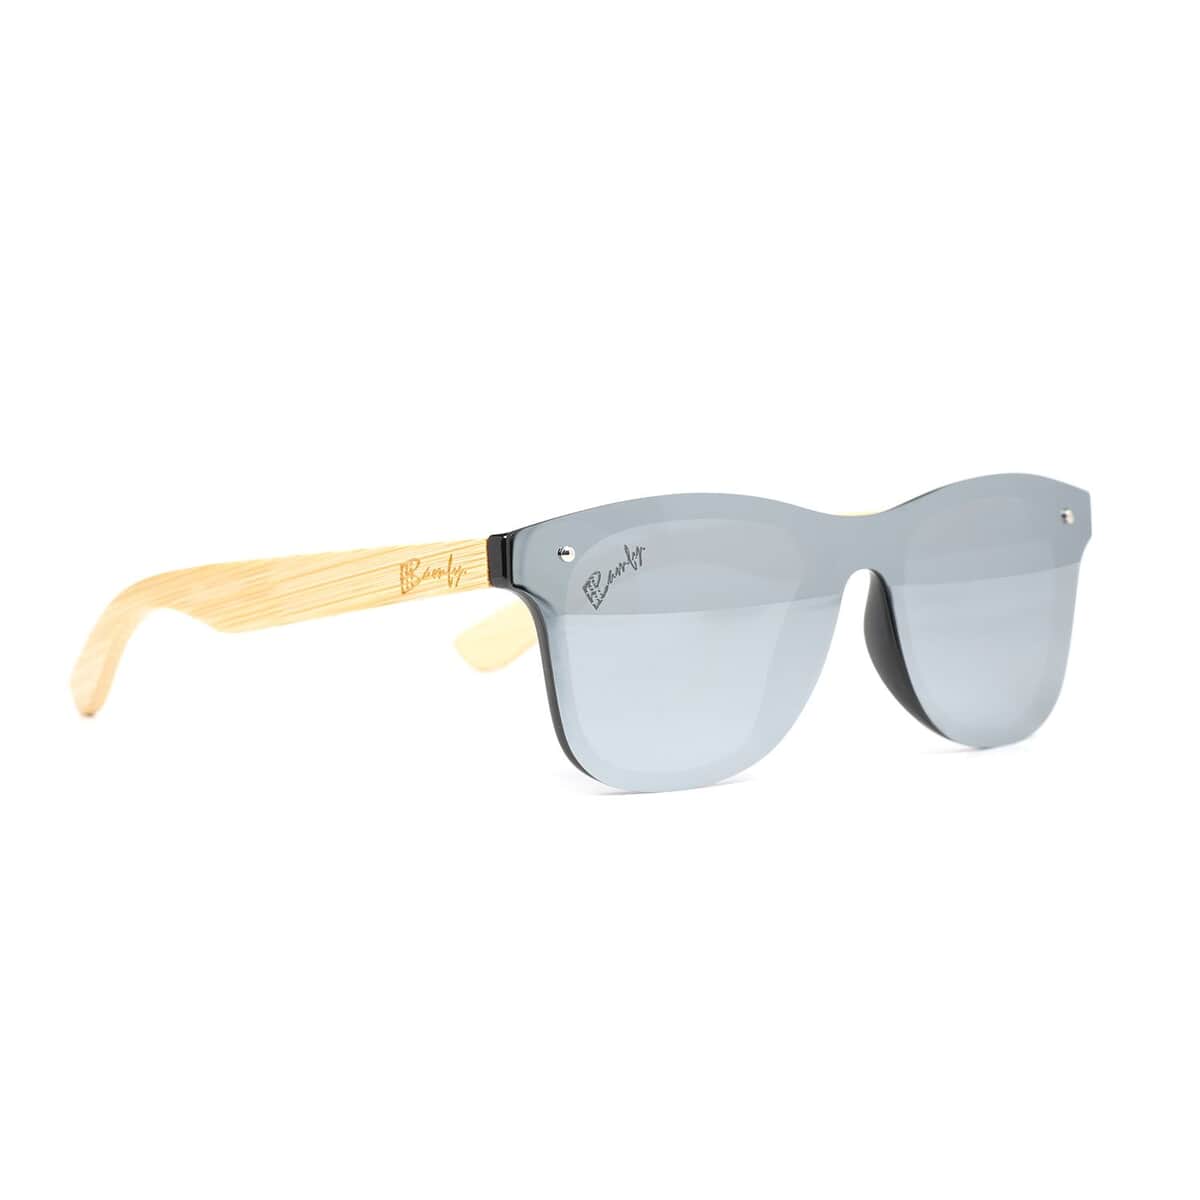 Bamfy Venice UV400 Polarized Sunglasses with Bamboo Legs and Case -Seamless Silver image number 3